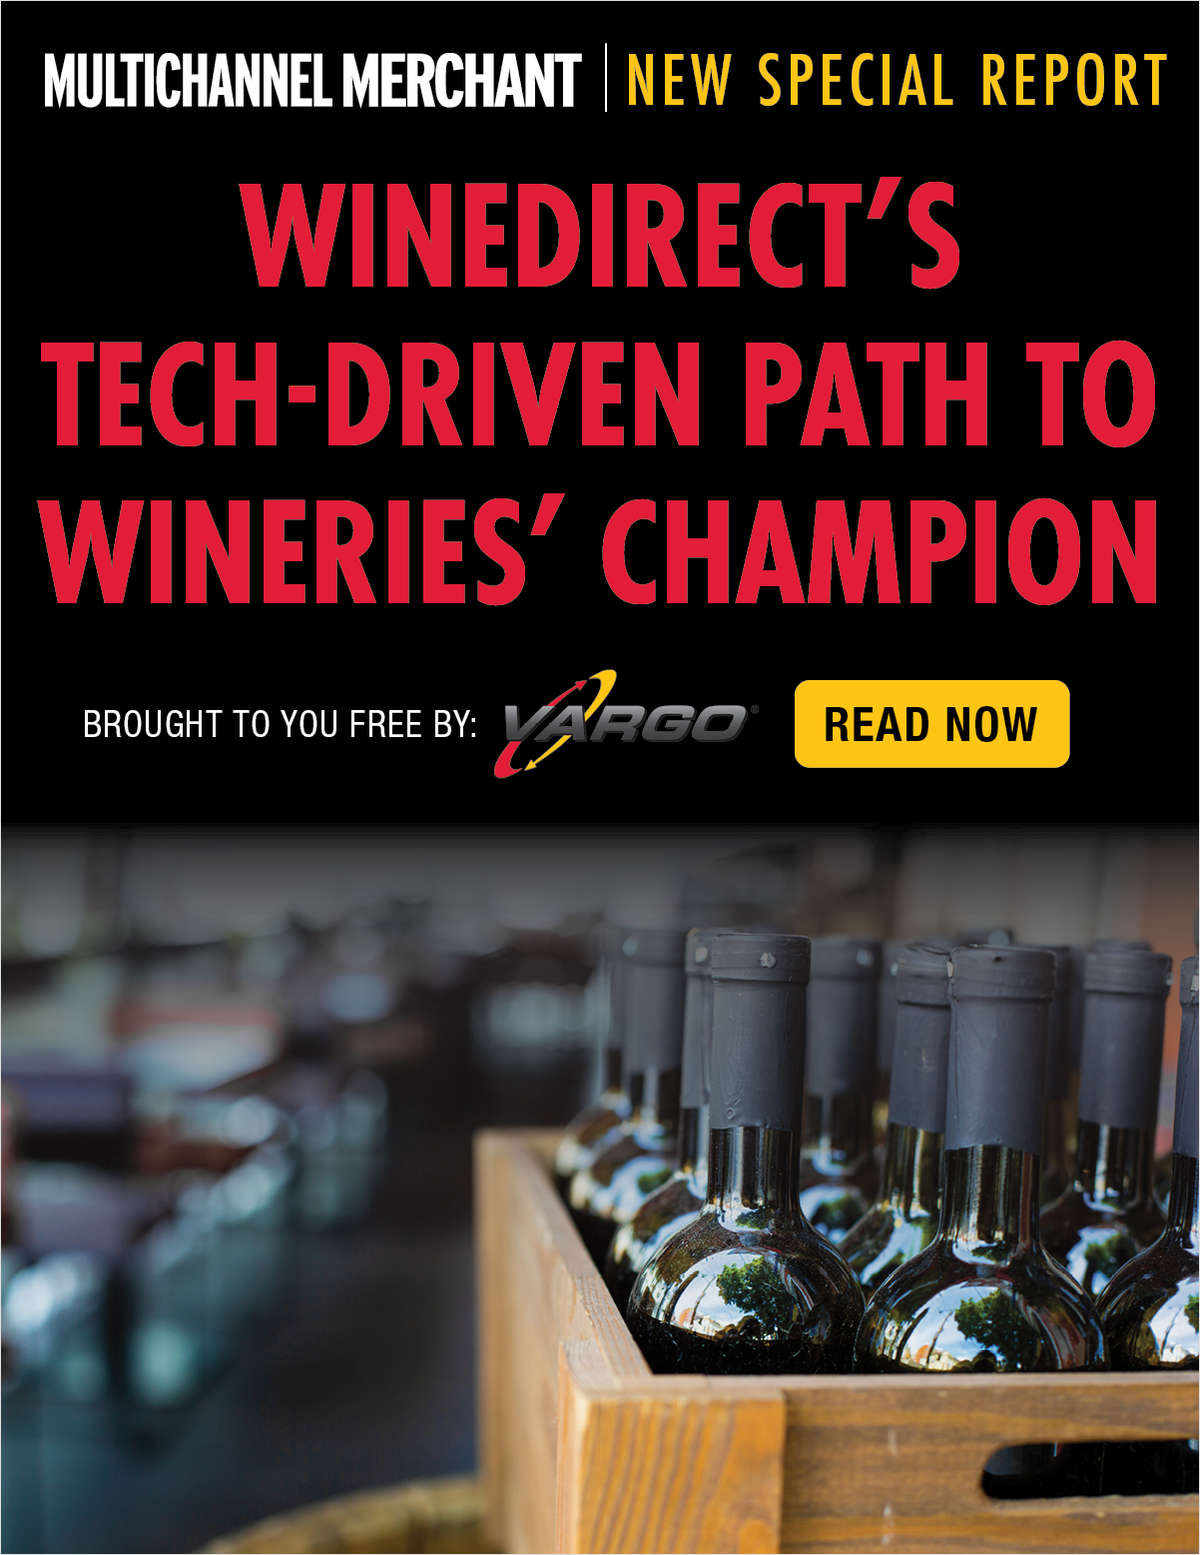 WineDirect's Tech-Driven Path to Wineries' Champion